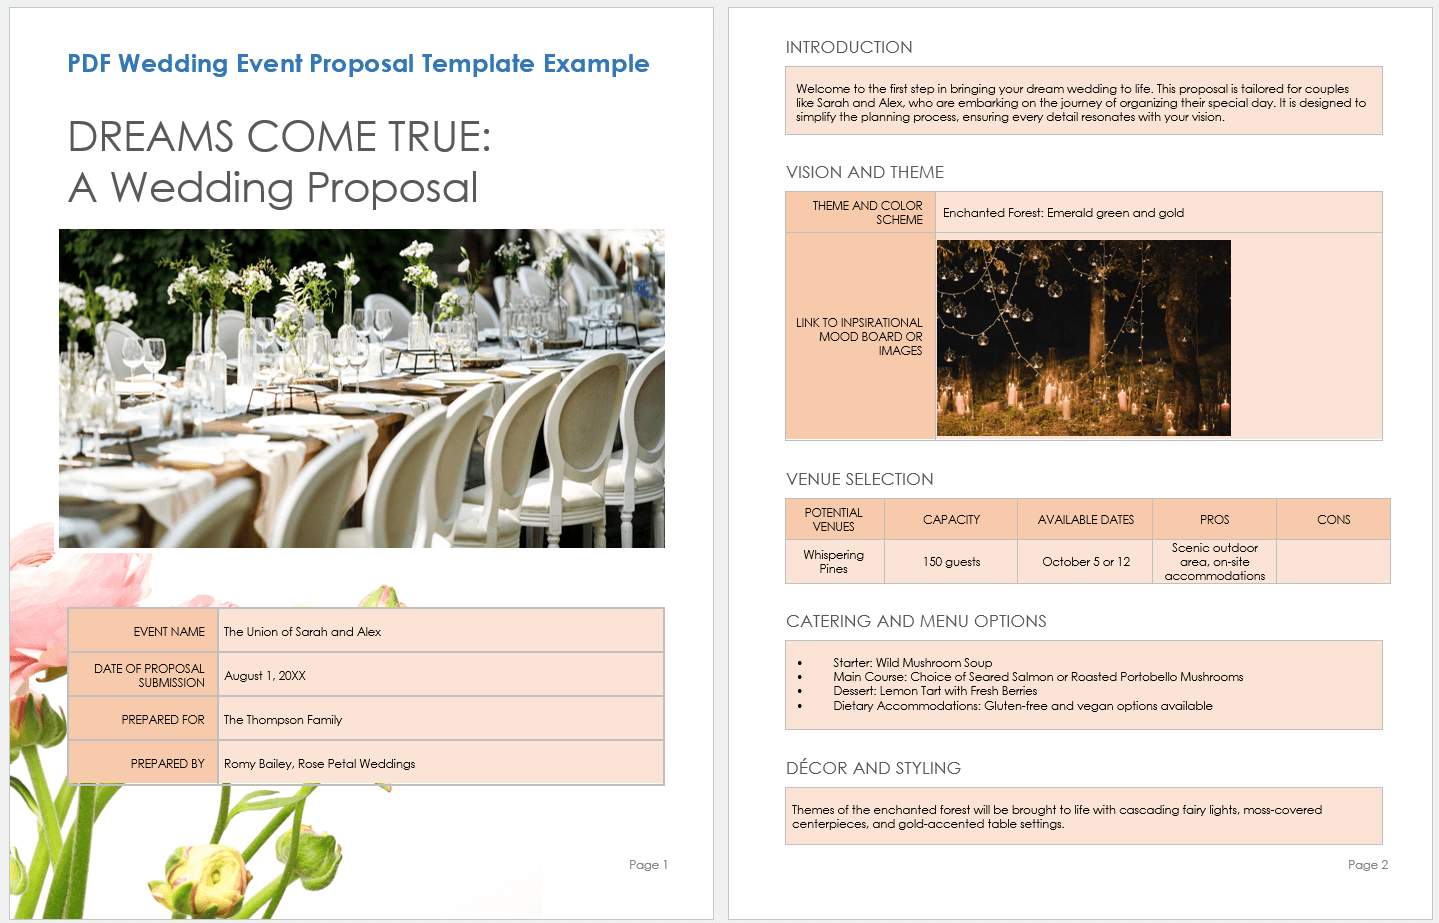 PDF Wedding Event Proposal Template Example